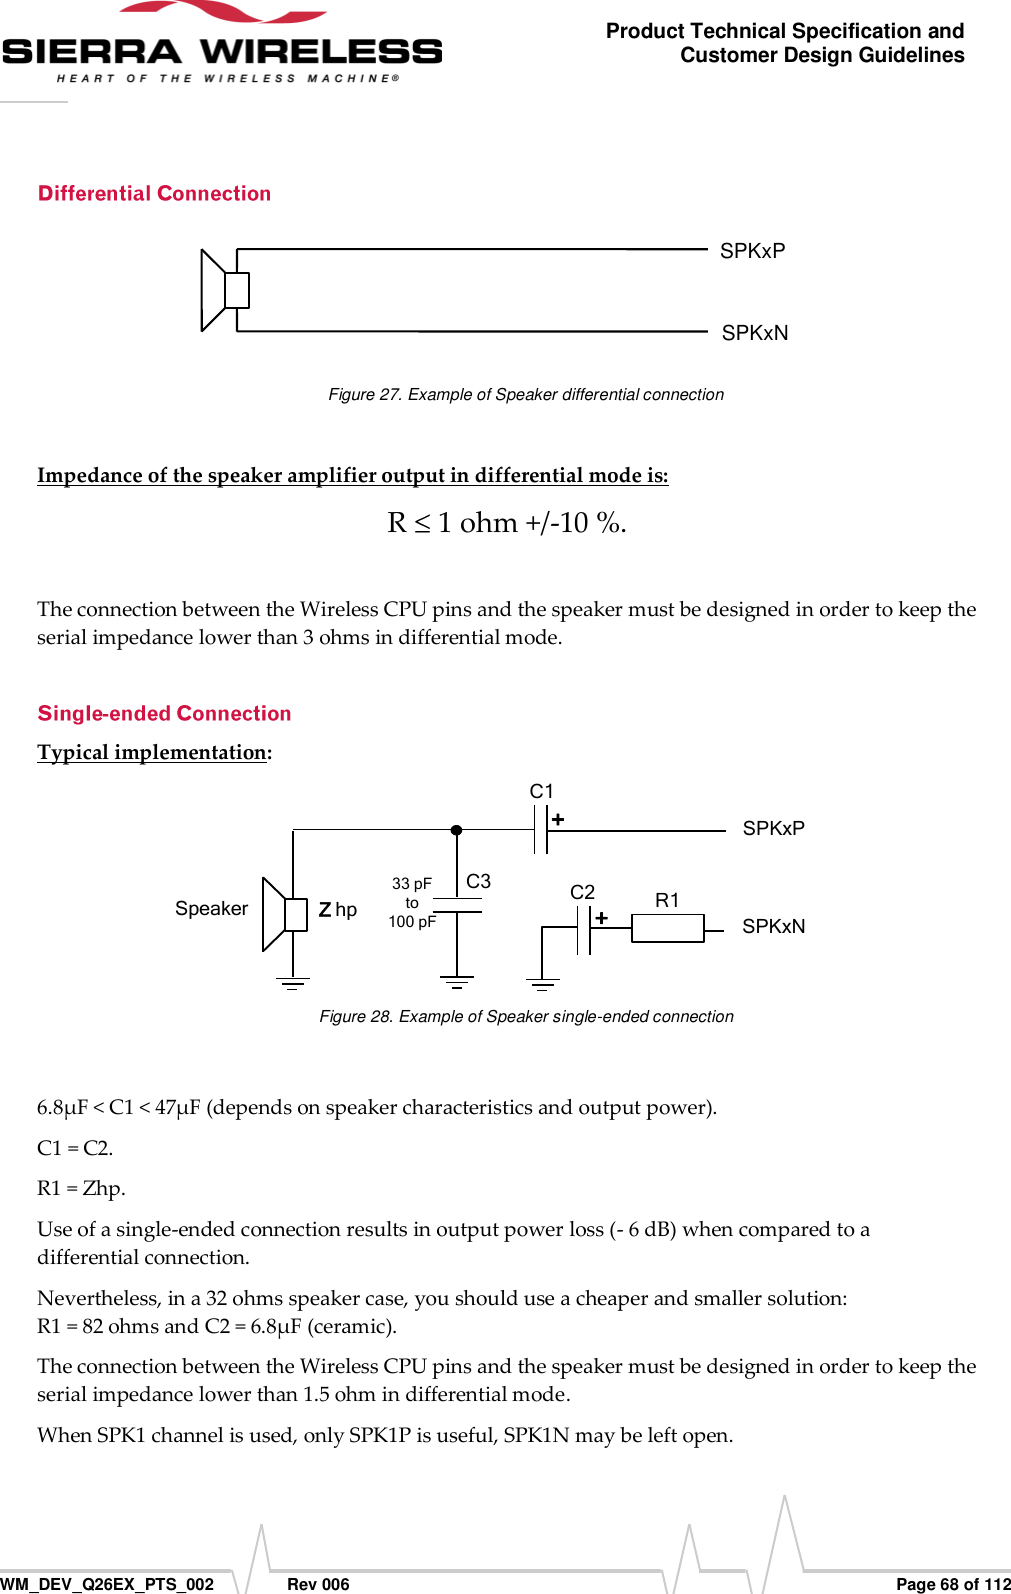      WM_DEV_Q26EX_PTS_002  Rev 006  Page 68 of 112 Product Technical Specification and Customer Design Guidelines  SPKxP SPKxN  Figure 27. Example of Speaker differential connection  Impedance of the speaker amplifier output in differential mode is: R   1 ohm +/-10 %.  The connection between the Wireless CPU pins and the speaker must be designed in order to keep the serial impedance lower than 3 ohms in differential mode. Typical implementation:  SPKxP C1 + SPKxN  C2  + Zhp   Speaker  C3 33 pFto100 pF R1  Figure 28. Example of Speaker single-ended connection  6.8µF &lt; C1 &lt; 47µF (depends on speaker characteristics and output power). C1 = C2. R1 = Zhp. Use of a single-ended connection results in output power loss (- 6 dB) when compared to a differential connection. Nevertheless, in a 32 ohms speaker case, you should use a cheaper and smaller solution:  R1 = 82 ohms and C2 = 6.8µF (ceramic). The connection between the Wireless CPU pins and the speaker must be designed in order to keep the serial impedance lower than 1.5 ohm in differential mode. When SPK1 channel is used, only SPK1P is useful, SPK1N may be left open. 